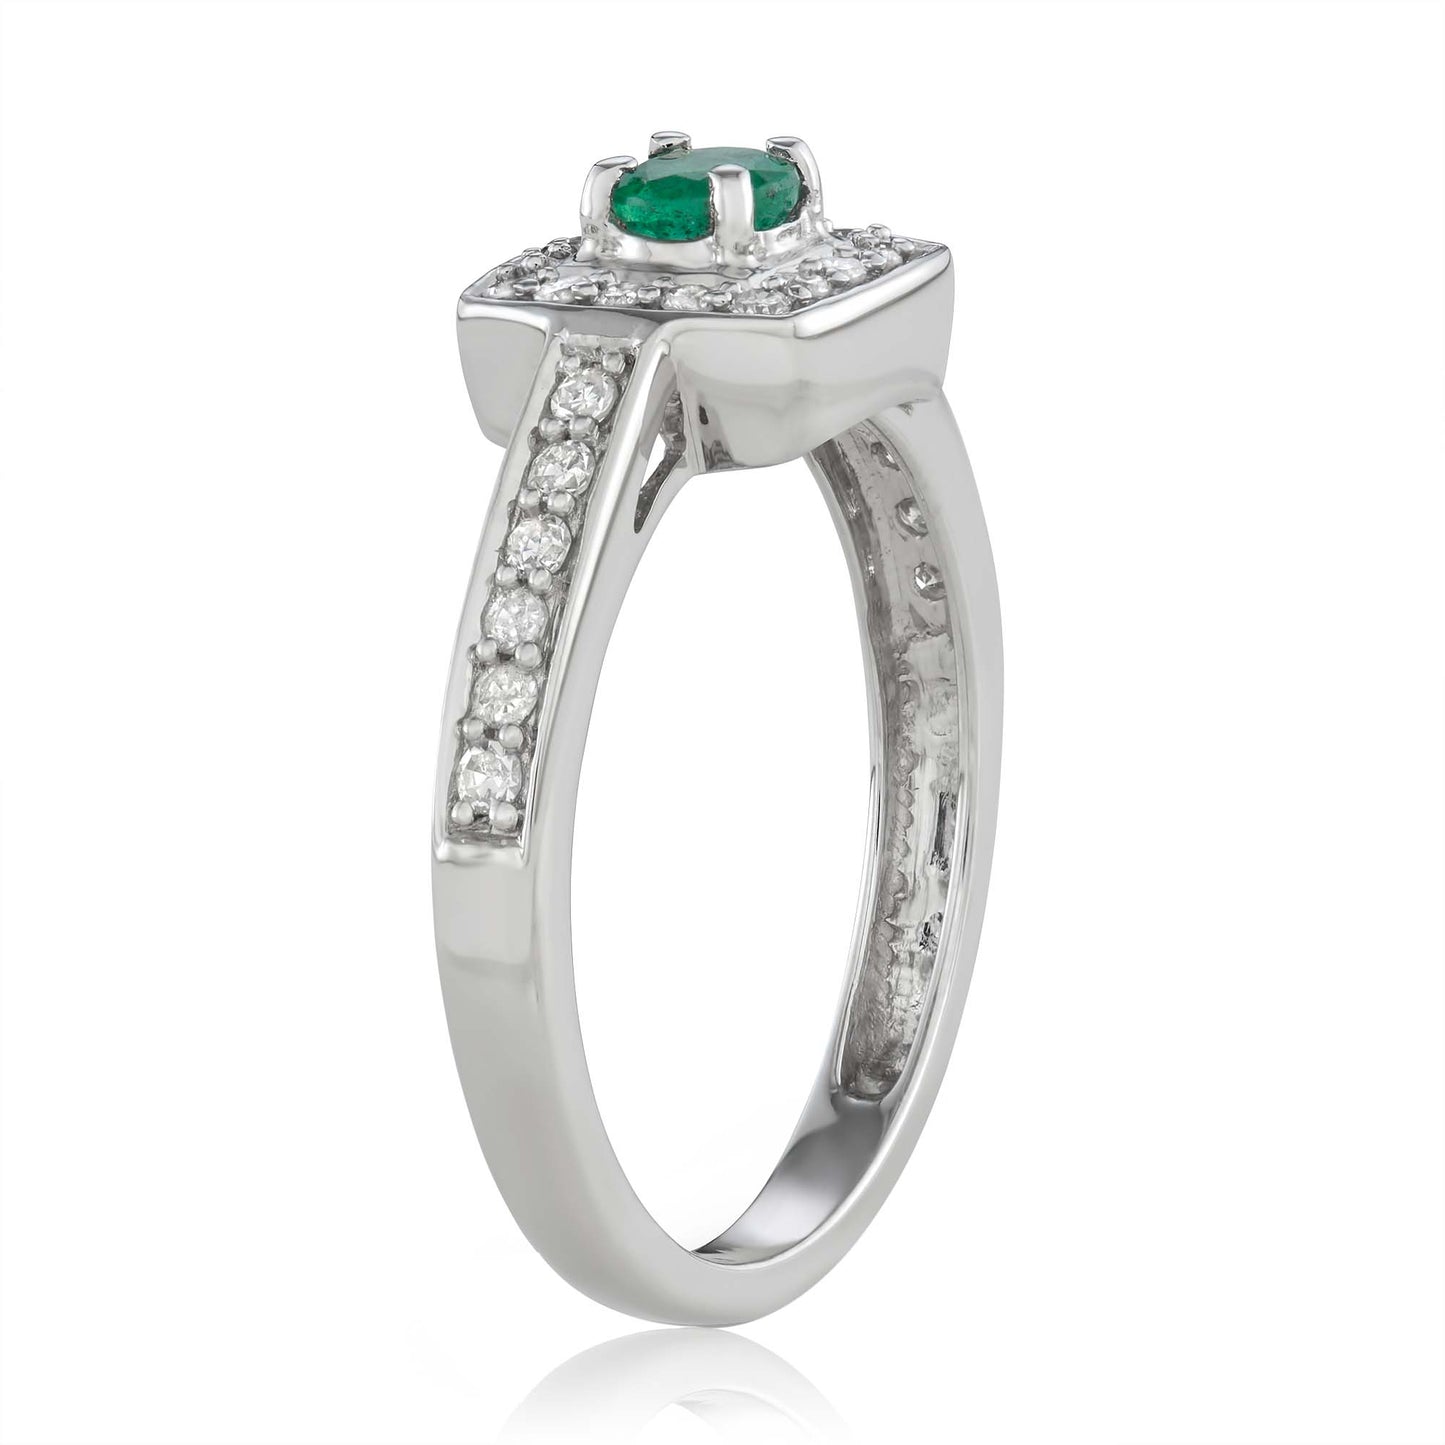 14K White Gold 0.50ct TW Emerald and Diamond Halo Engagement Ring